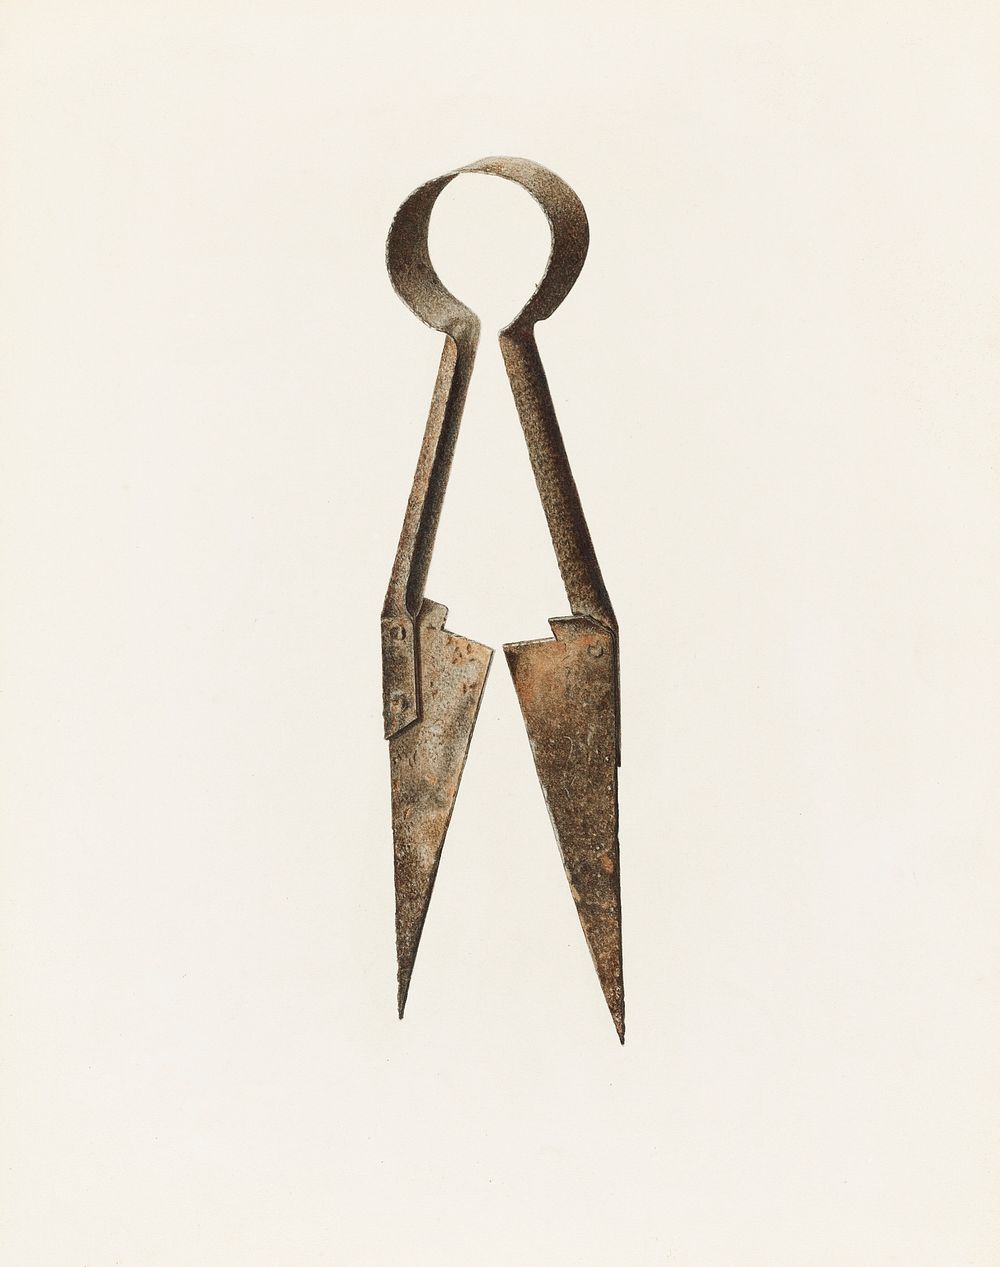 Trimming Shears (1935&ndash;1942) by Harold Ballerd. Original from The National Gallery of Art. Digitally enhanced by…